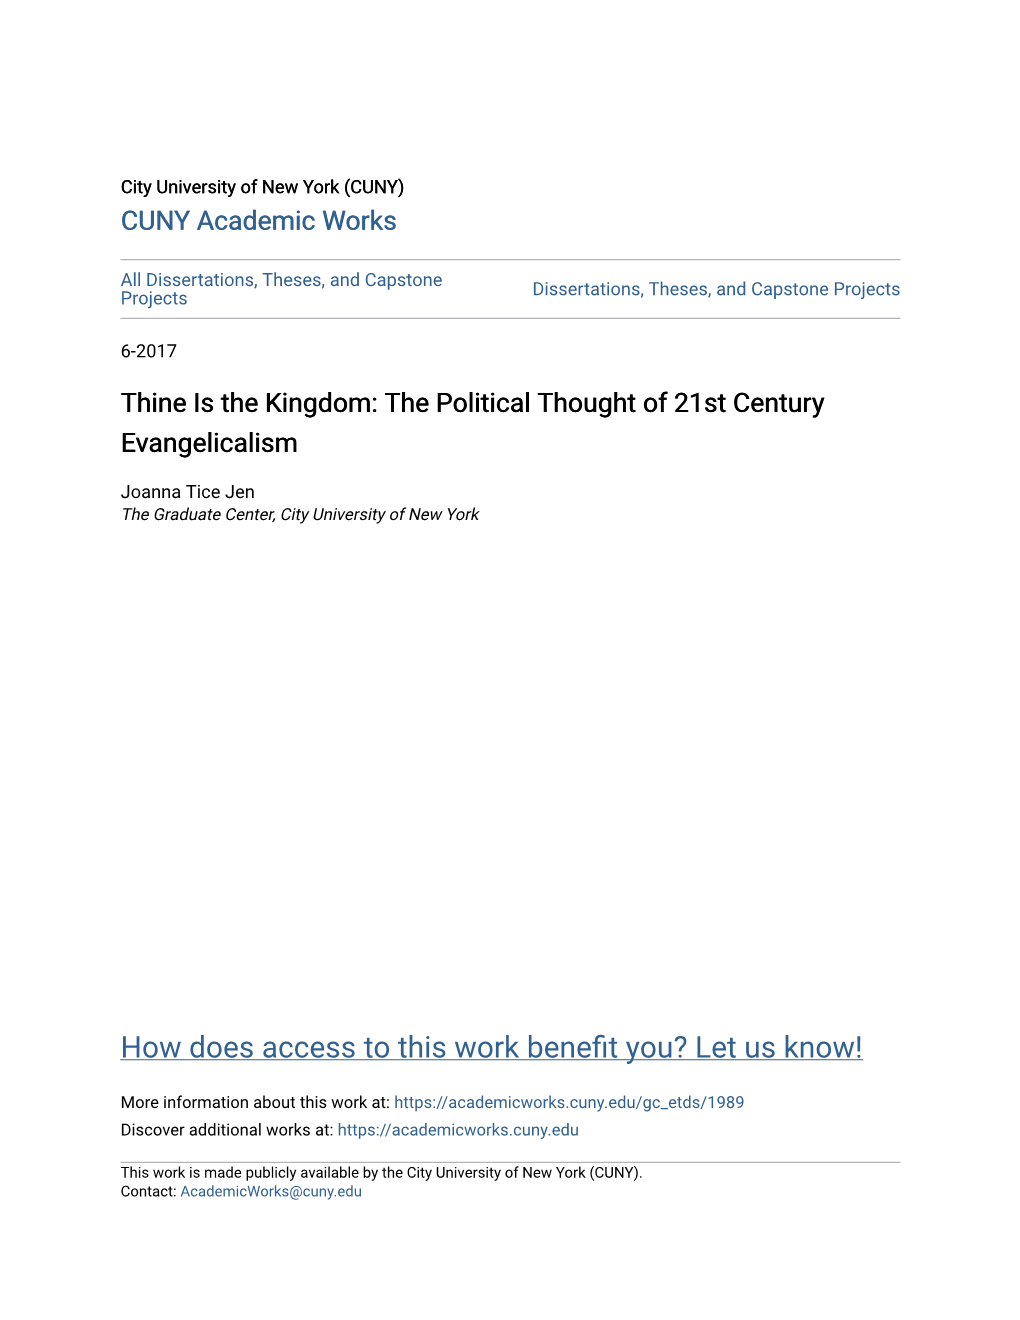 The Political Thought of 21St Century Evangelicalism